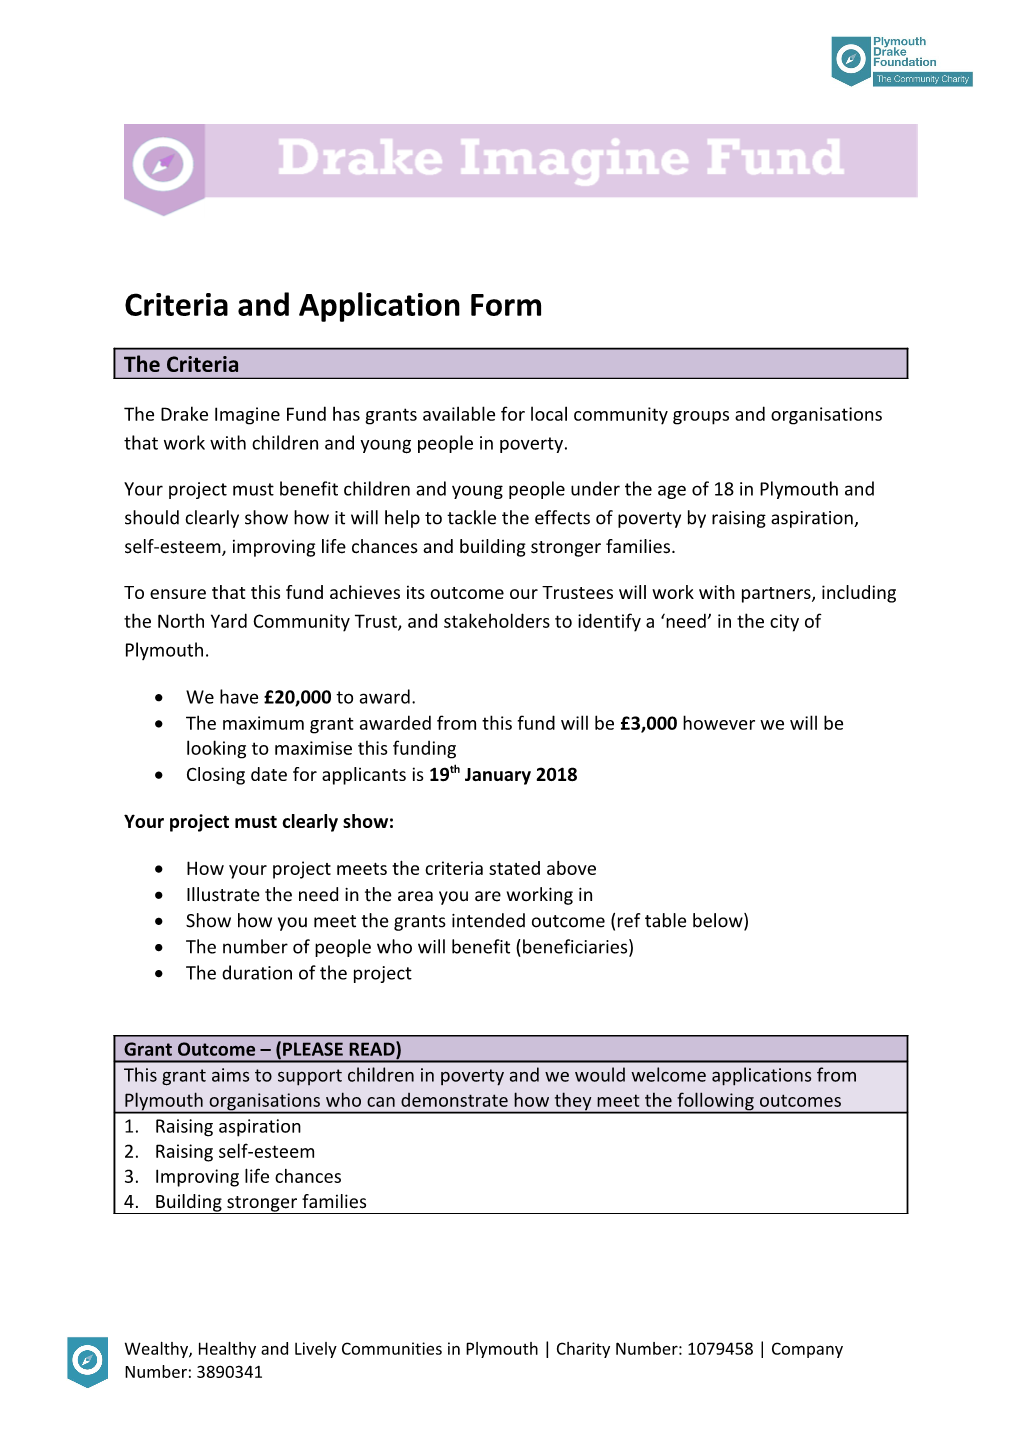 Criteria and Application Form s2